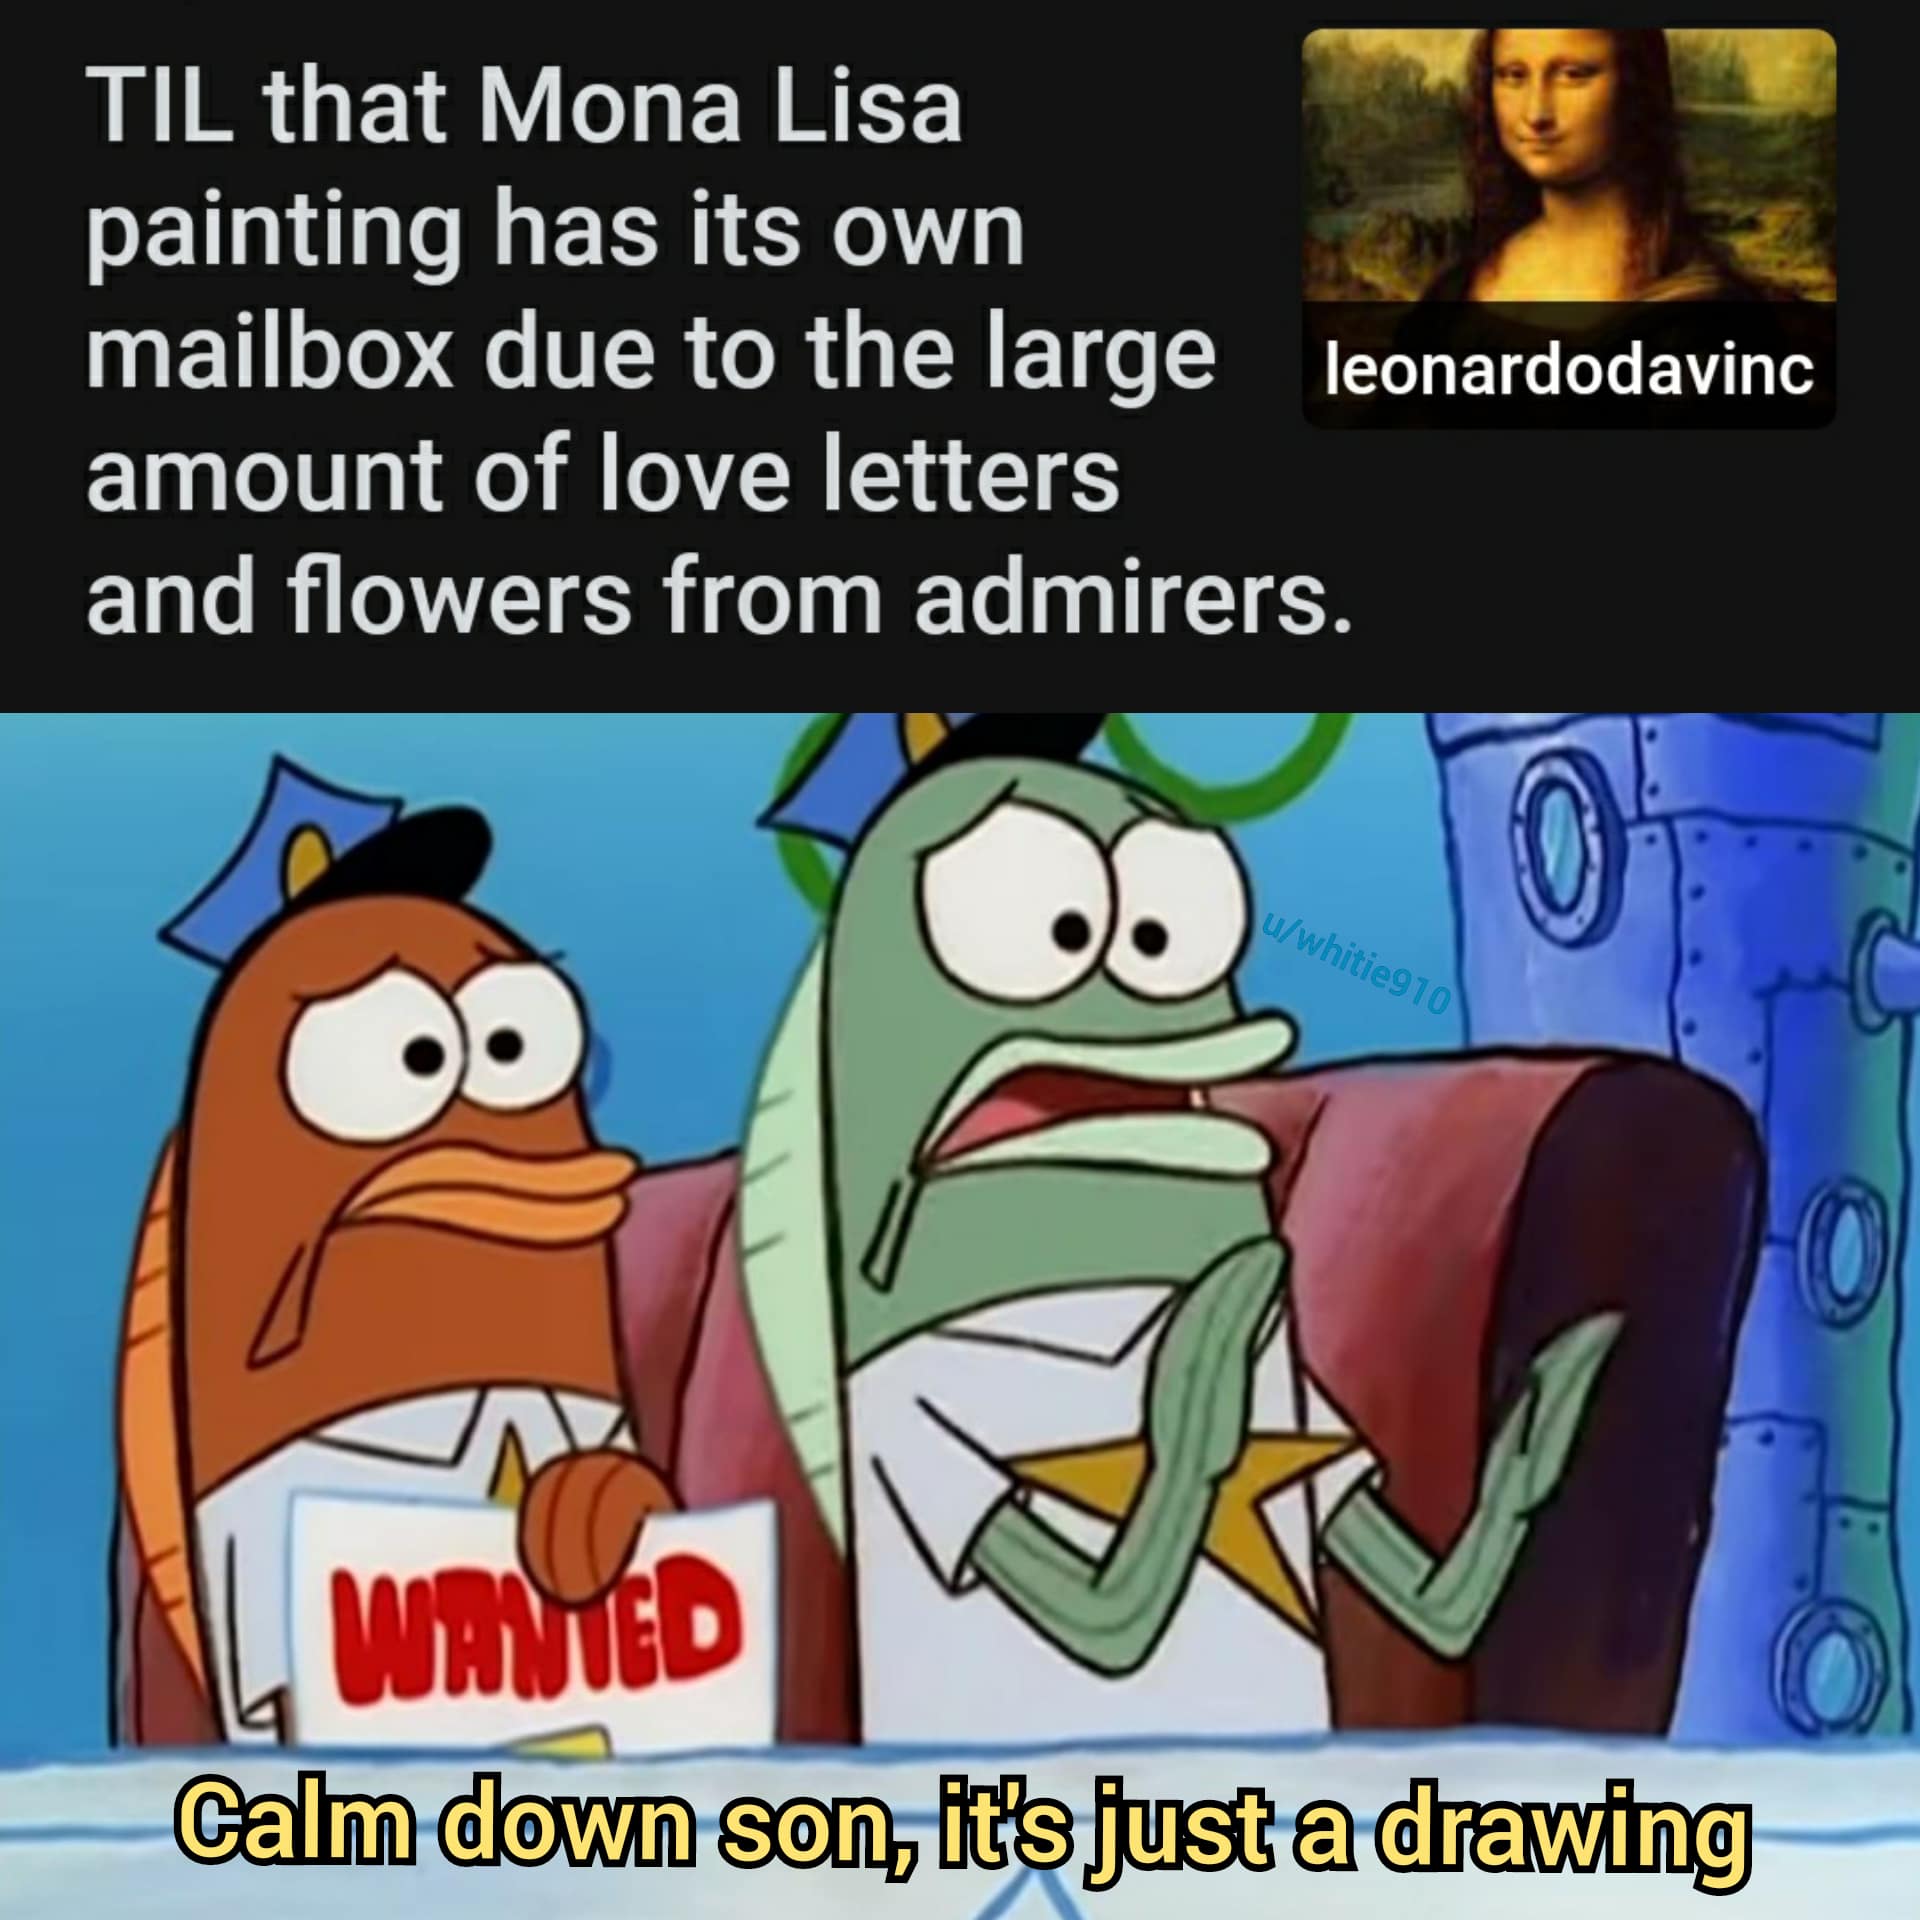 Spongebob, PM, Da Vinci, Yoshikage Kira, Mona Lisa, France Spongebob Memes Spongebob, PM, Da Vinci, Yoshikage Kira, Mona Lisa, France text: TIL that Mona Lisa painting has its own mailbox due to the large leonardodavinc amount of love letters and flowers from admirers. Calm down son, it's just a drawing 